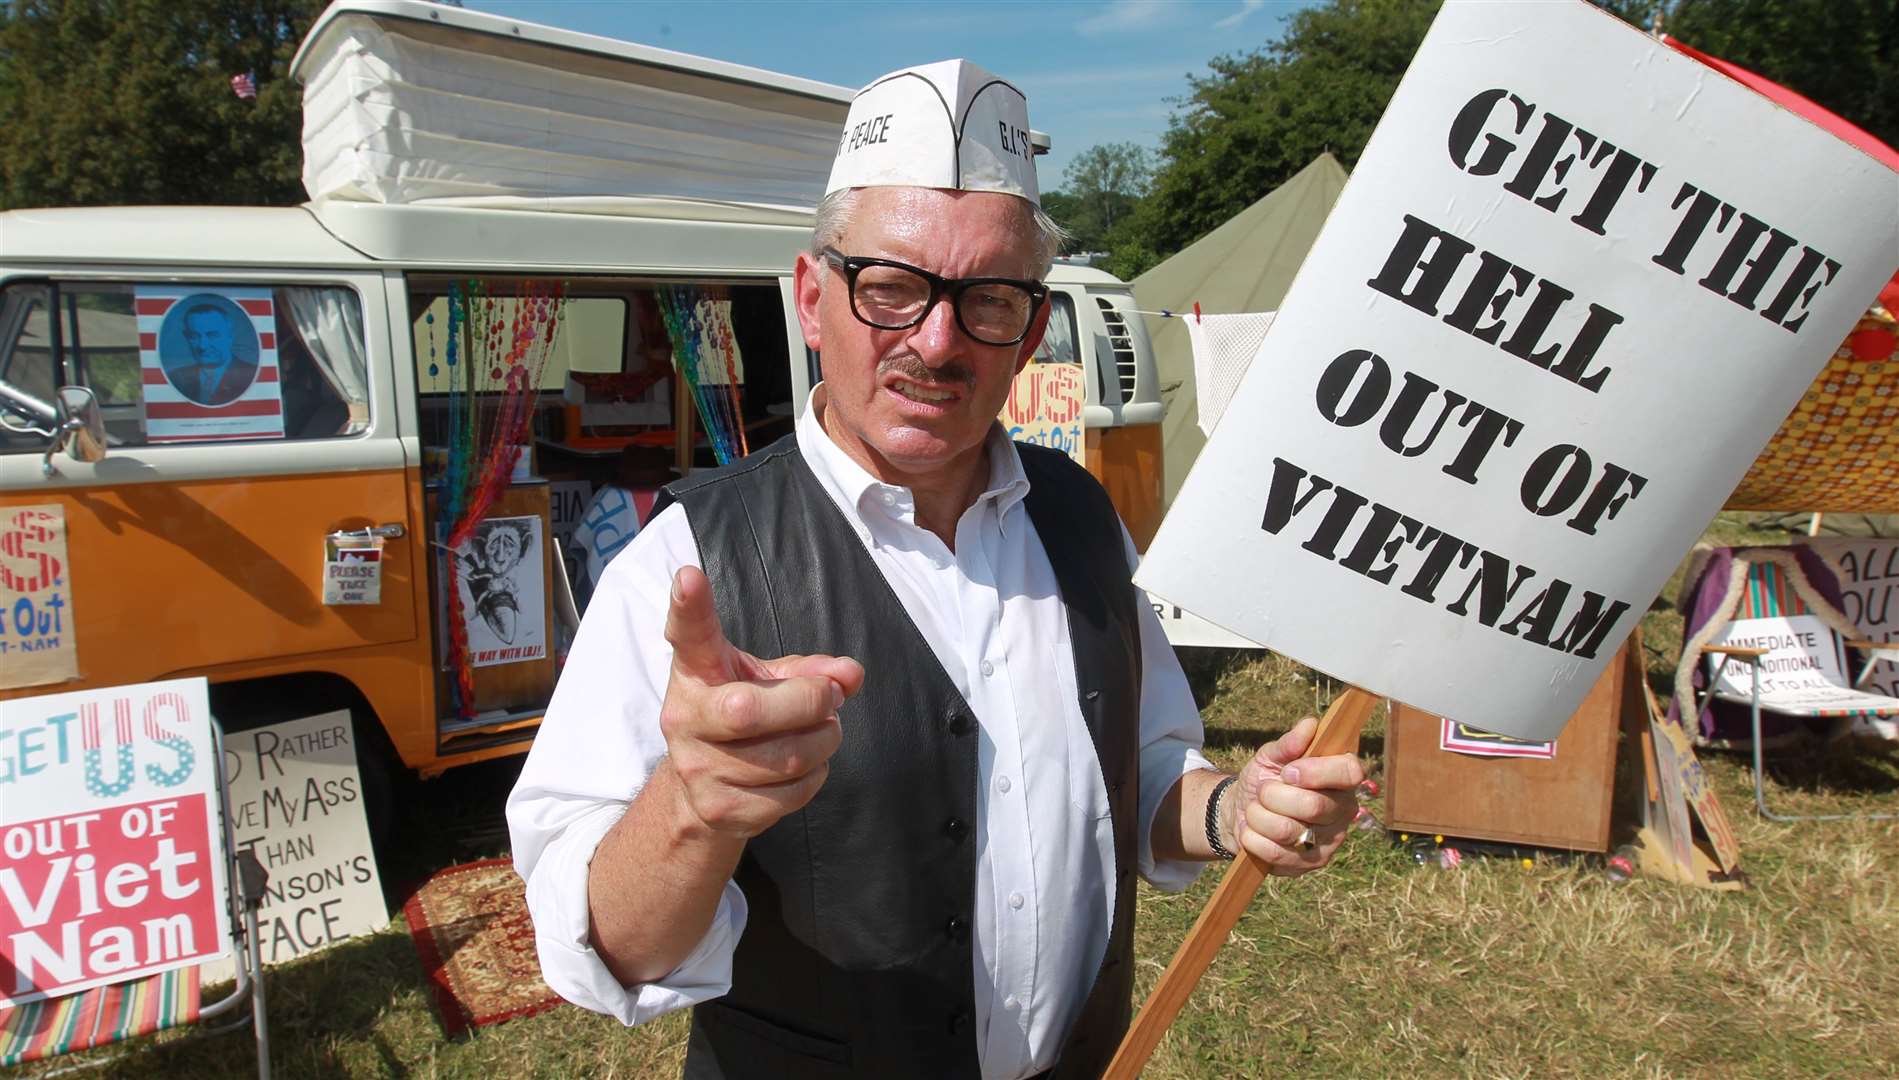 A man pretending to protest the Vietnam war was even spotted at a previous War and Peace Revival Picture: John Westhrop